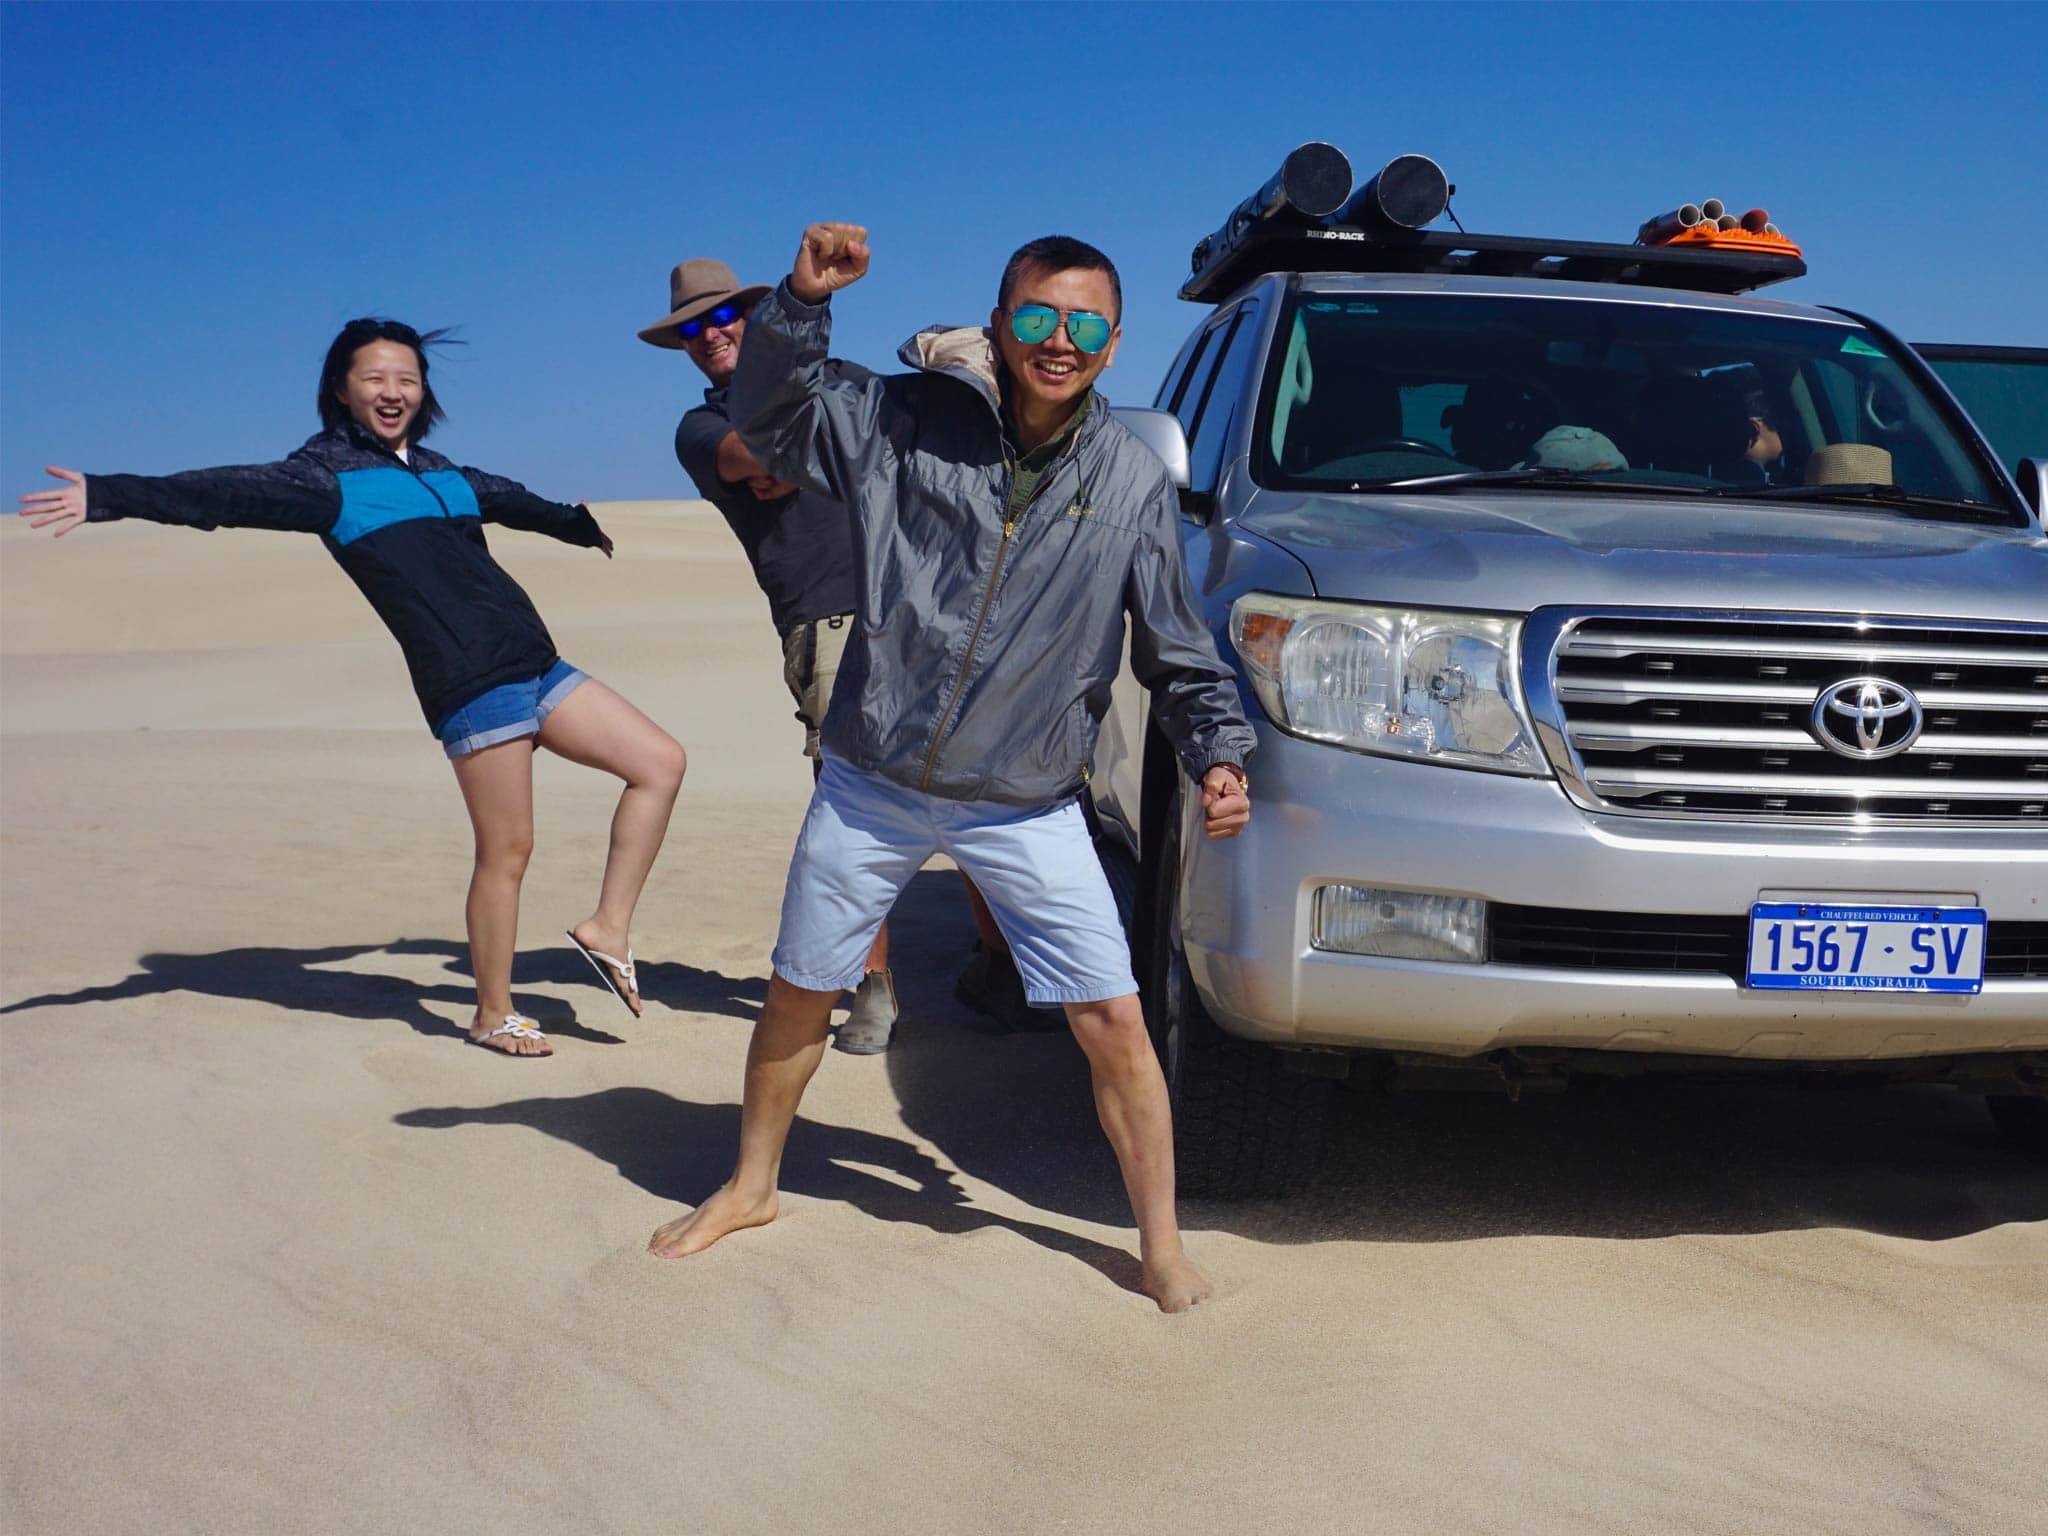 tourists on a sandhill with the car